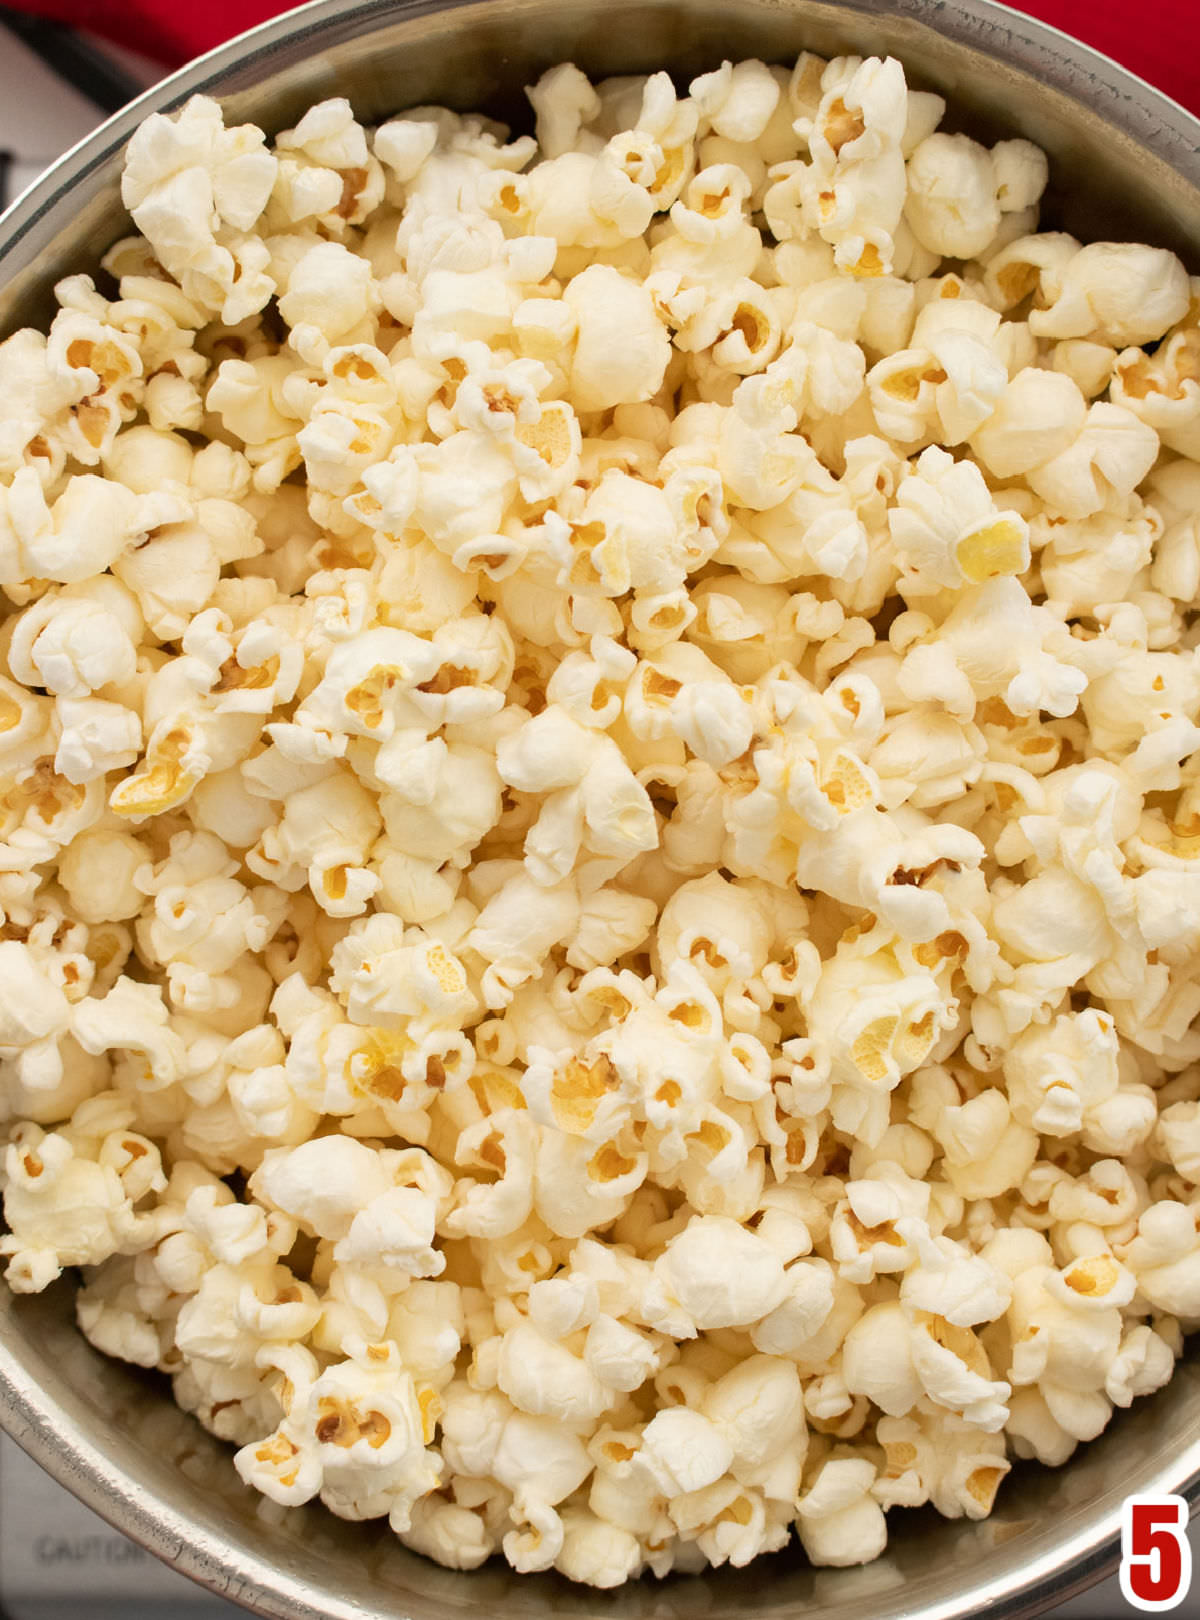 Closeup on a large pan filled with homemade popcorn made on a stovetop.